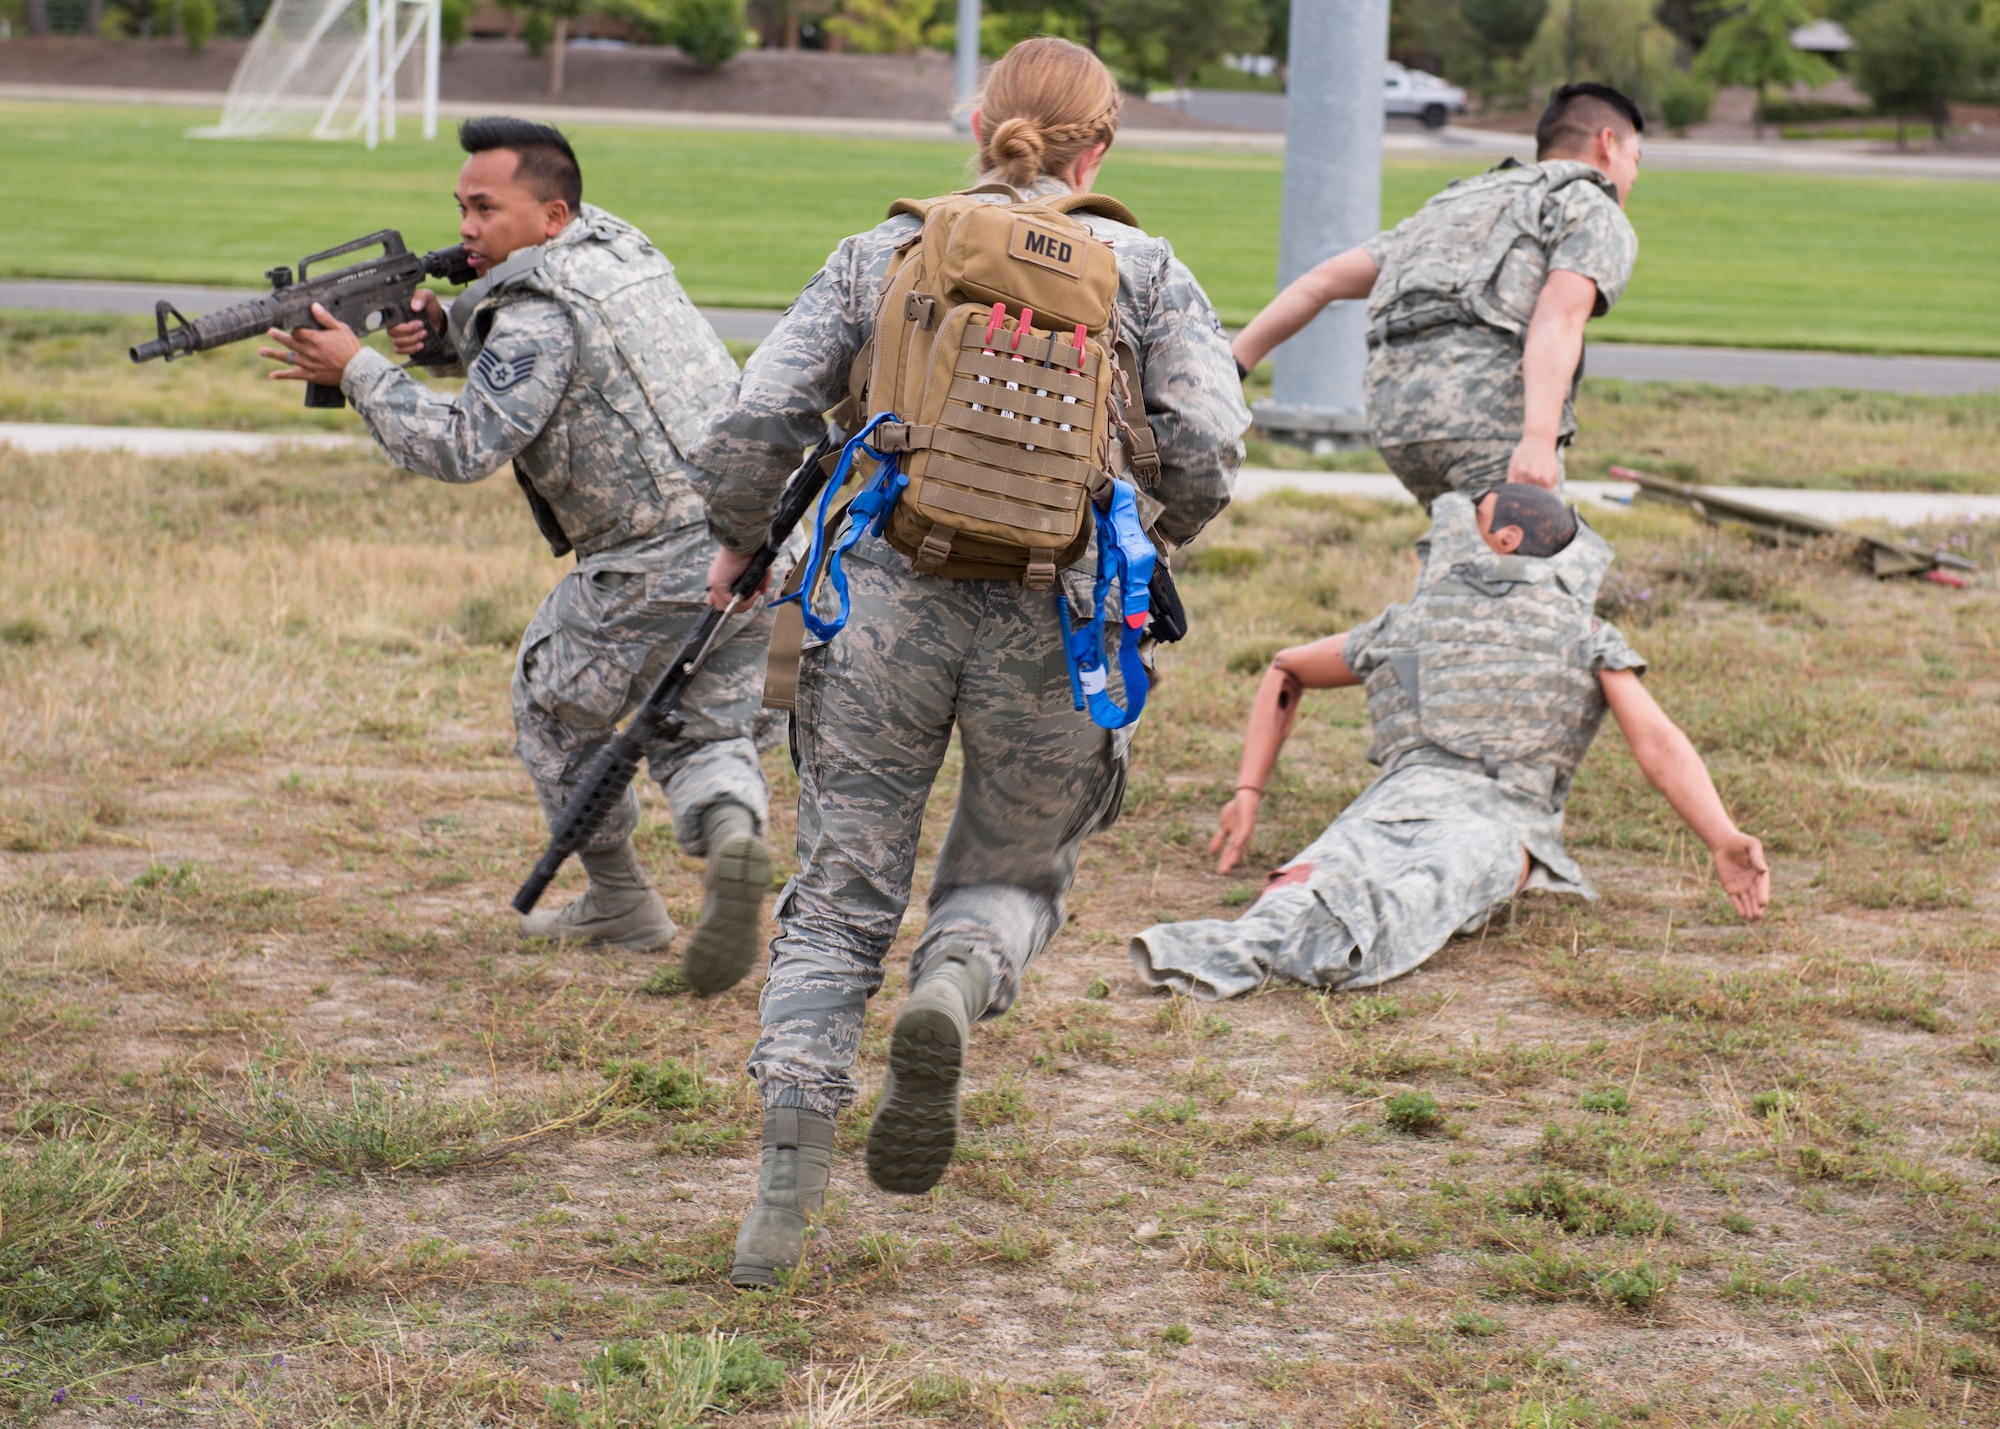 U.S. Air Force students provide cover while pulling a ‘wounded’ training mannequin out of the simulated line-of-fire during the Tactical Combat Casualty Care course at Fairchild Air Force Base, Washington, Sept. 12, 2019. Battlefield simulation drills are vital to provide medics and combat personnel with realistic situations where they provide life-saving care and evacuation of wounded. (U.S. Air Force photo by Senior Airman Ryan Lackey)